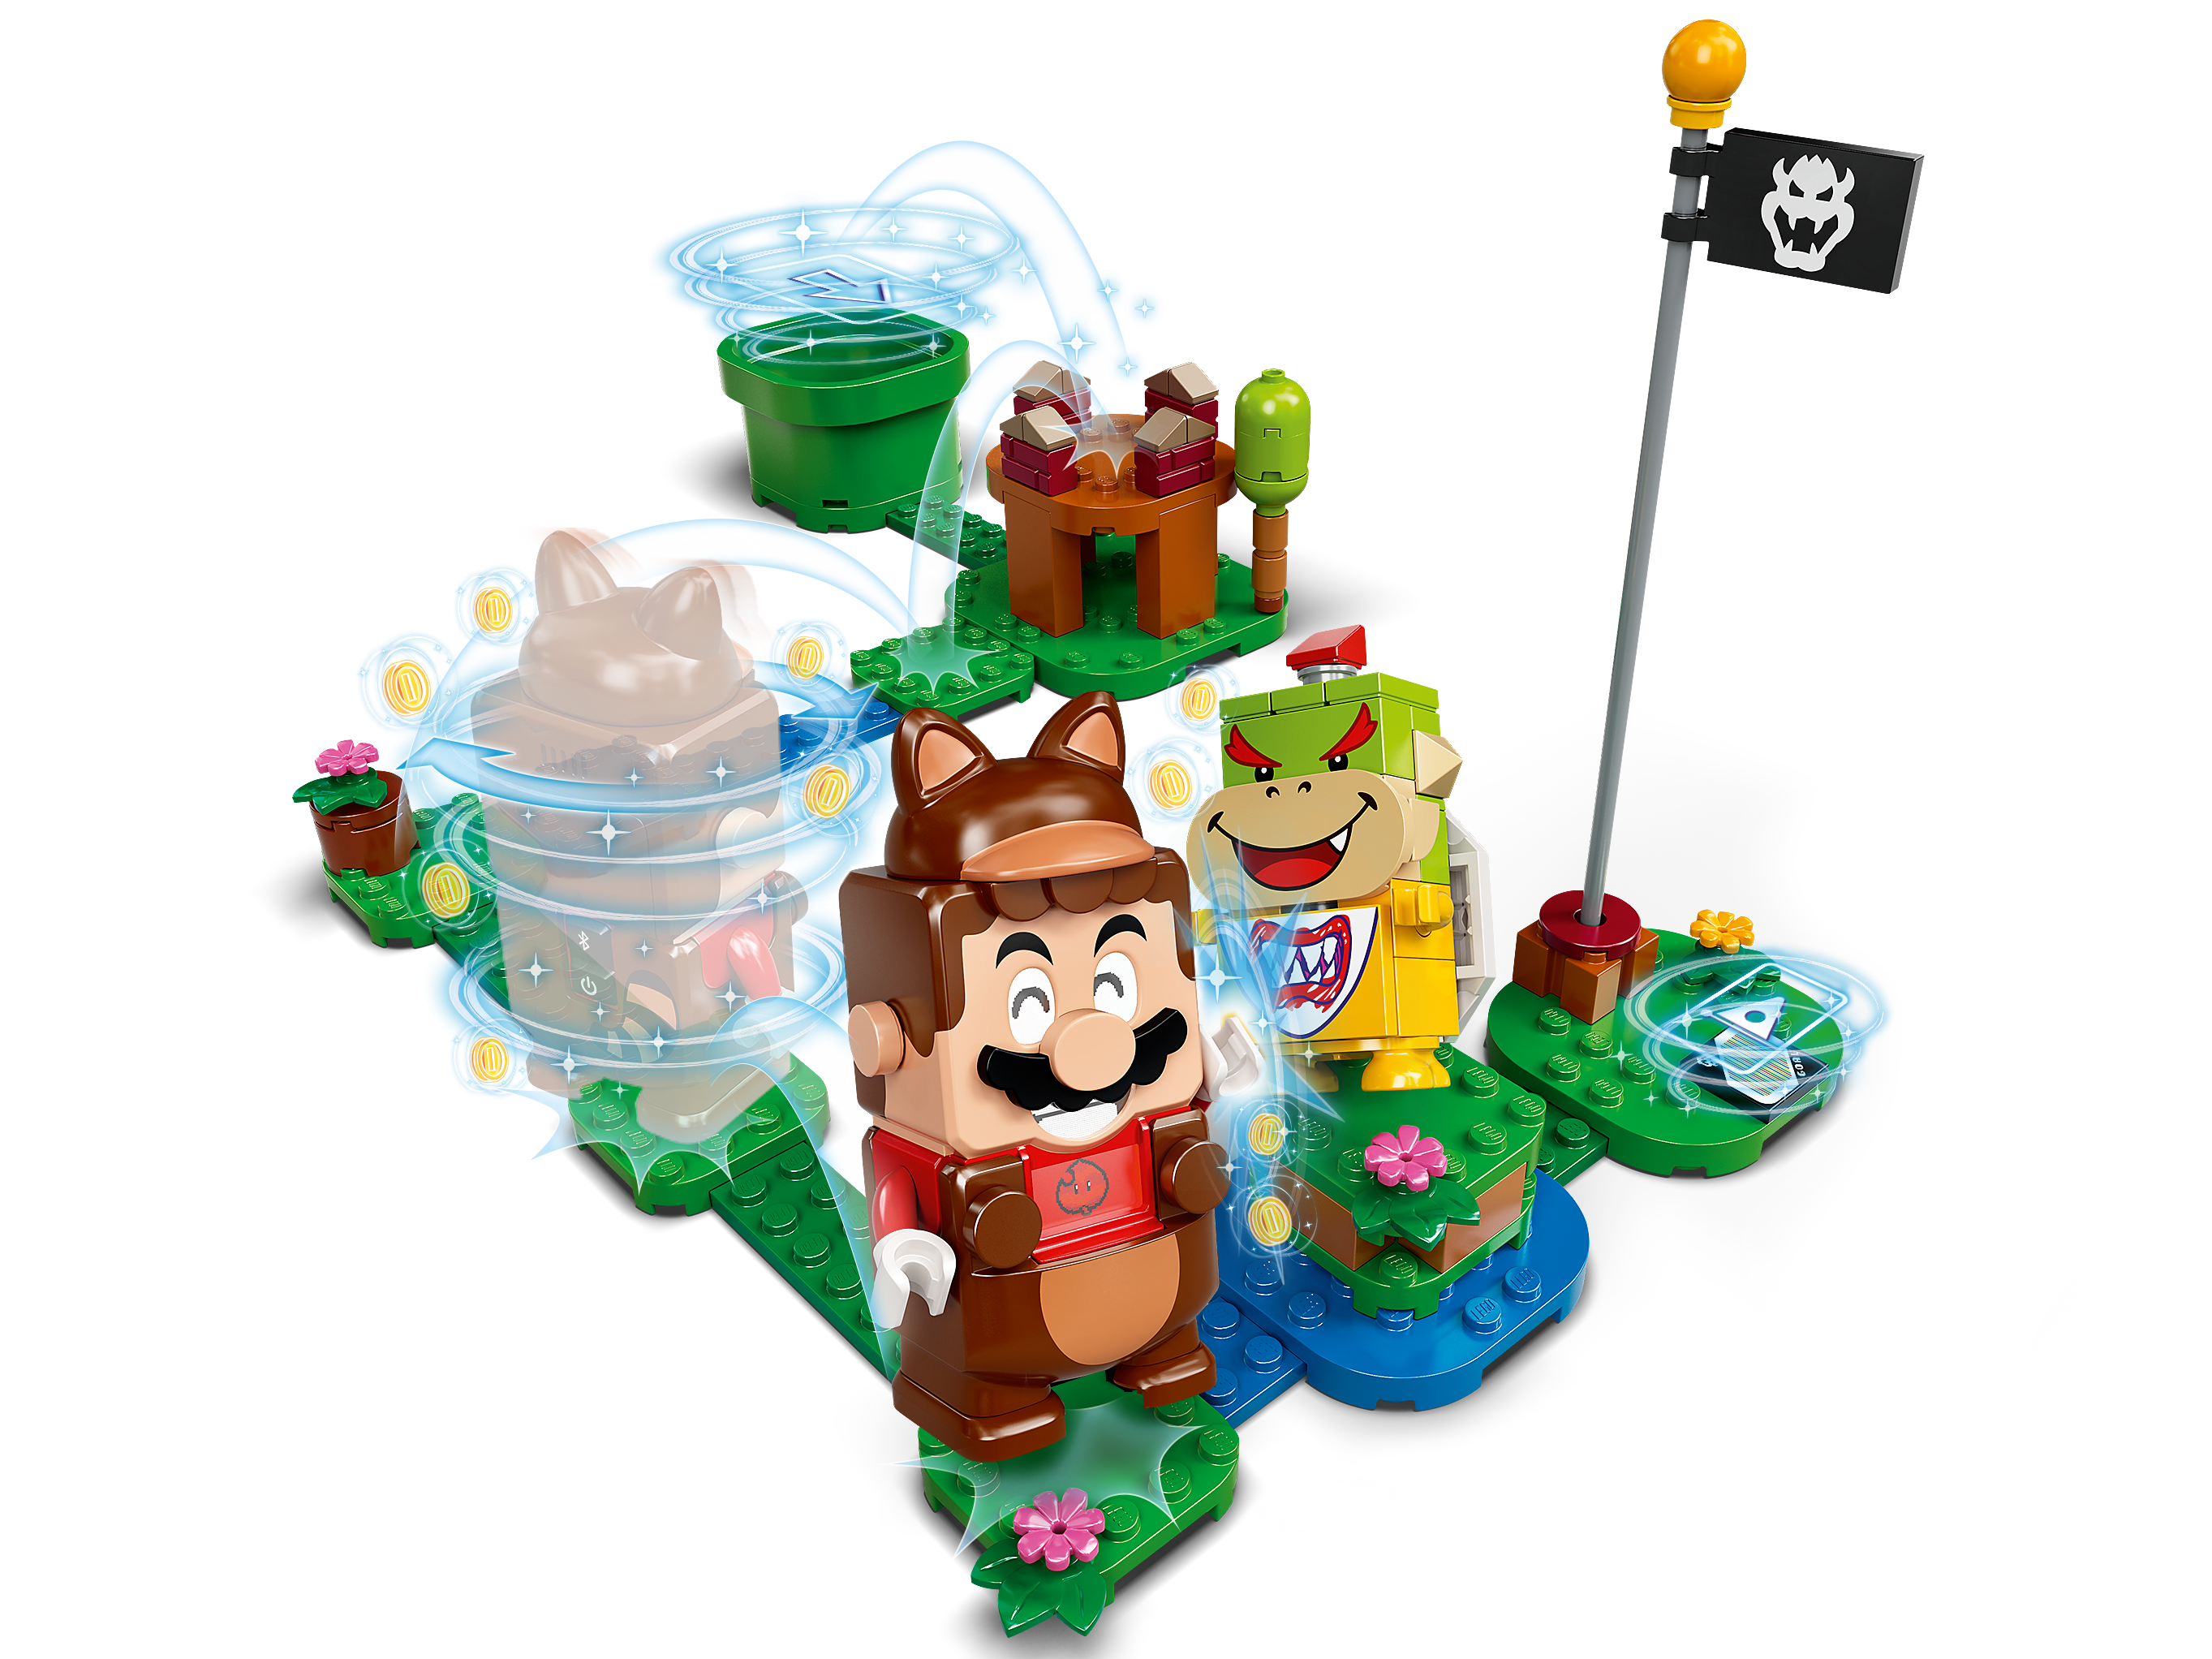 for sale online 13 Pieces LEGO Super Mario Tanooki Mario Power-Up Pack 71385 Building Kit